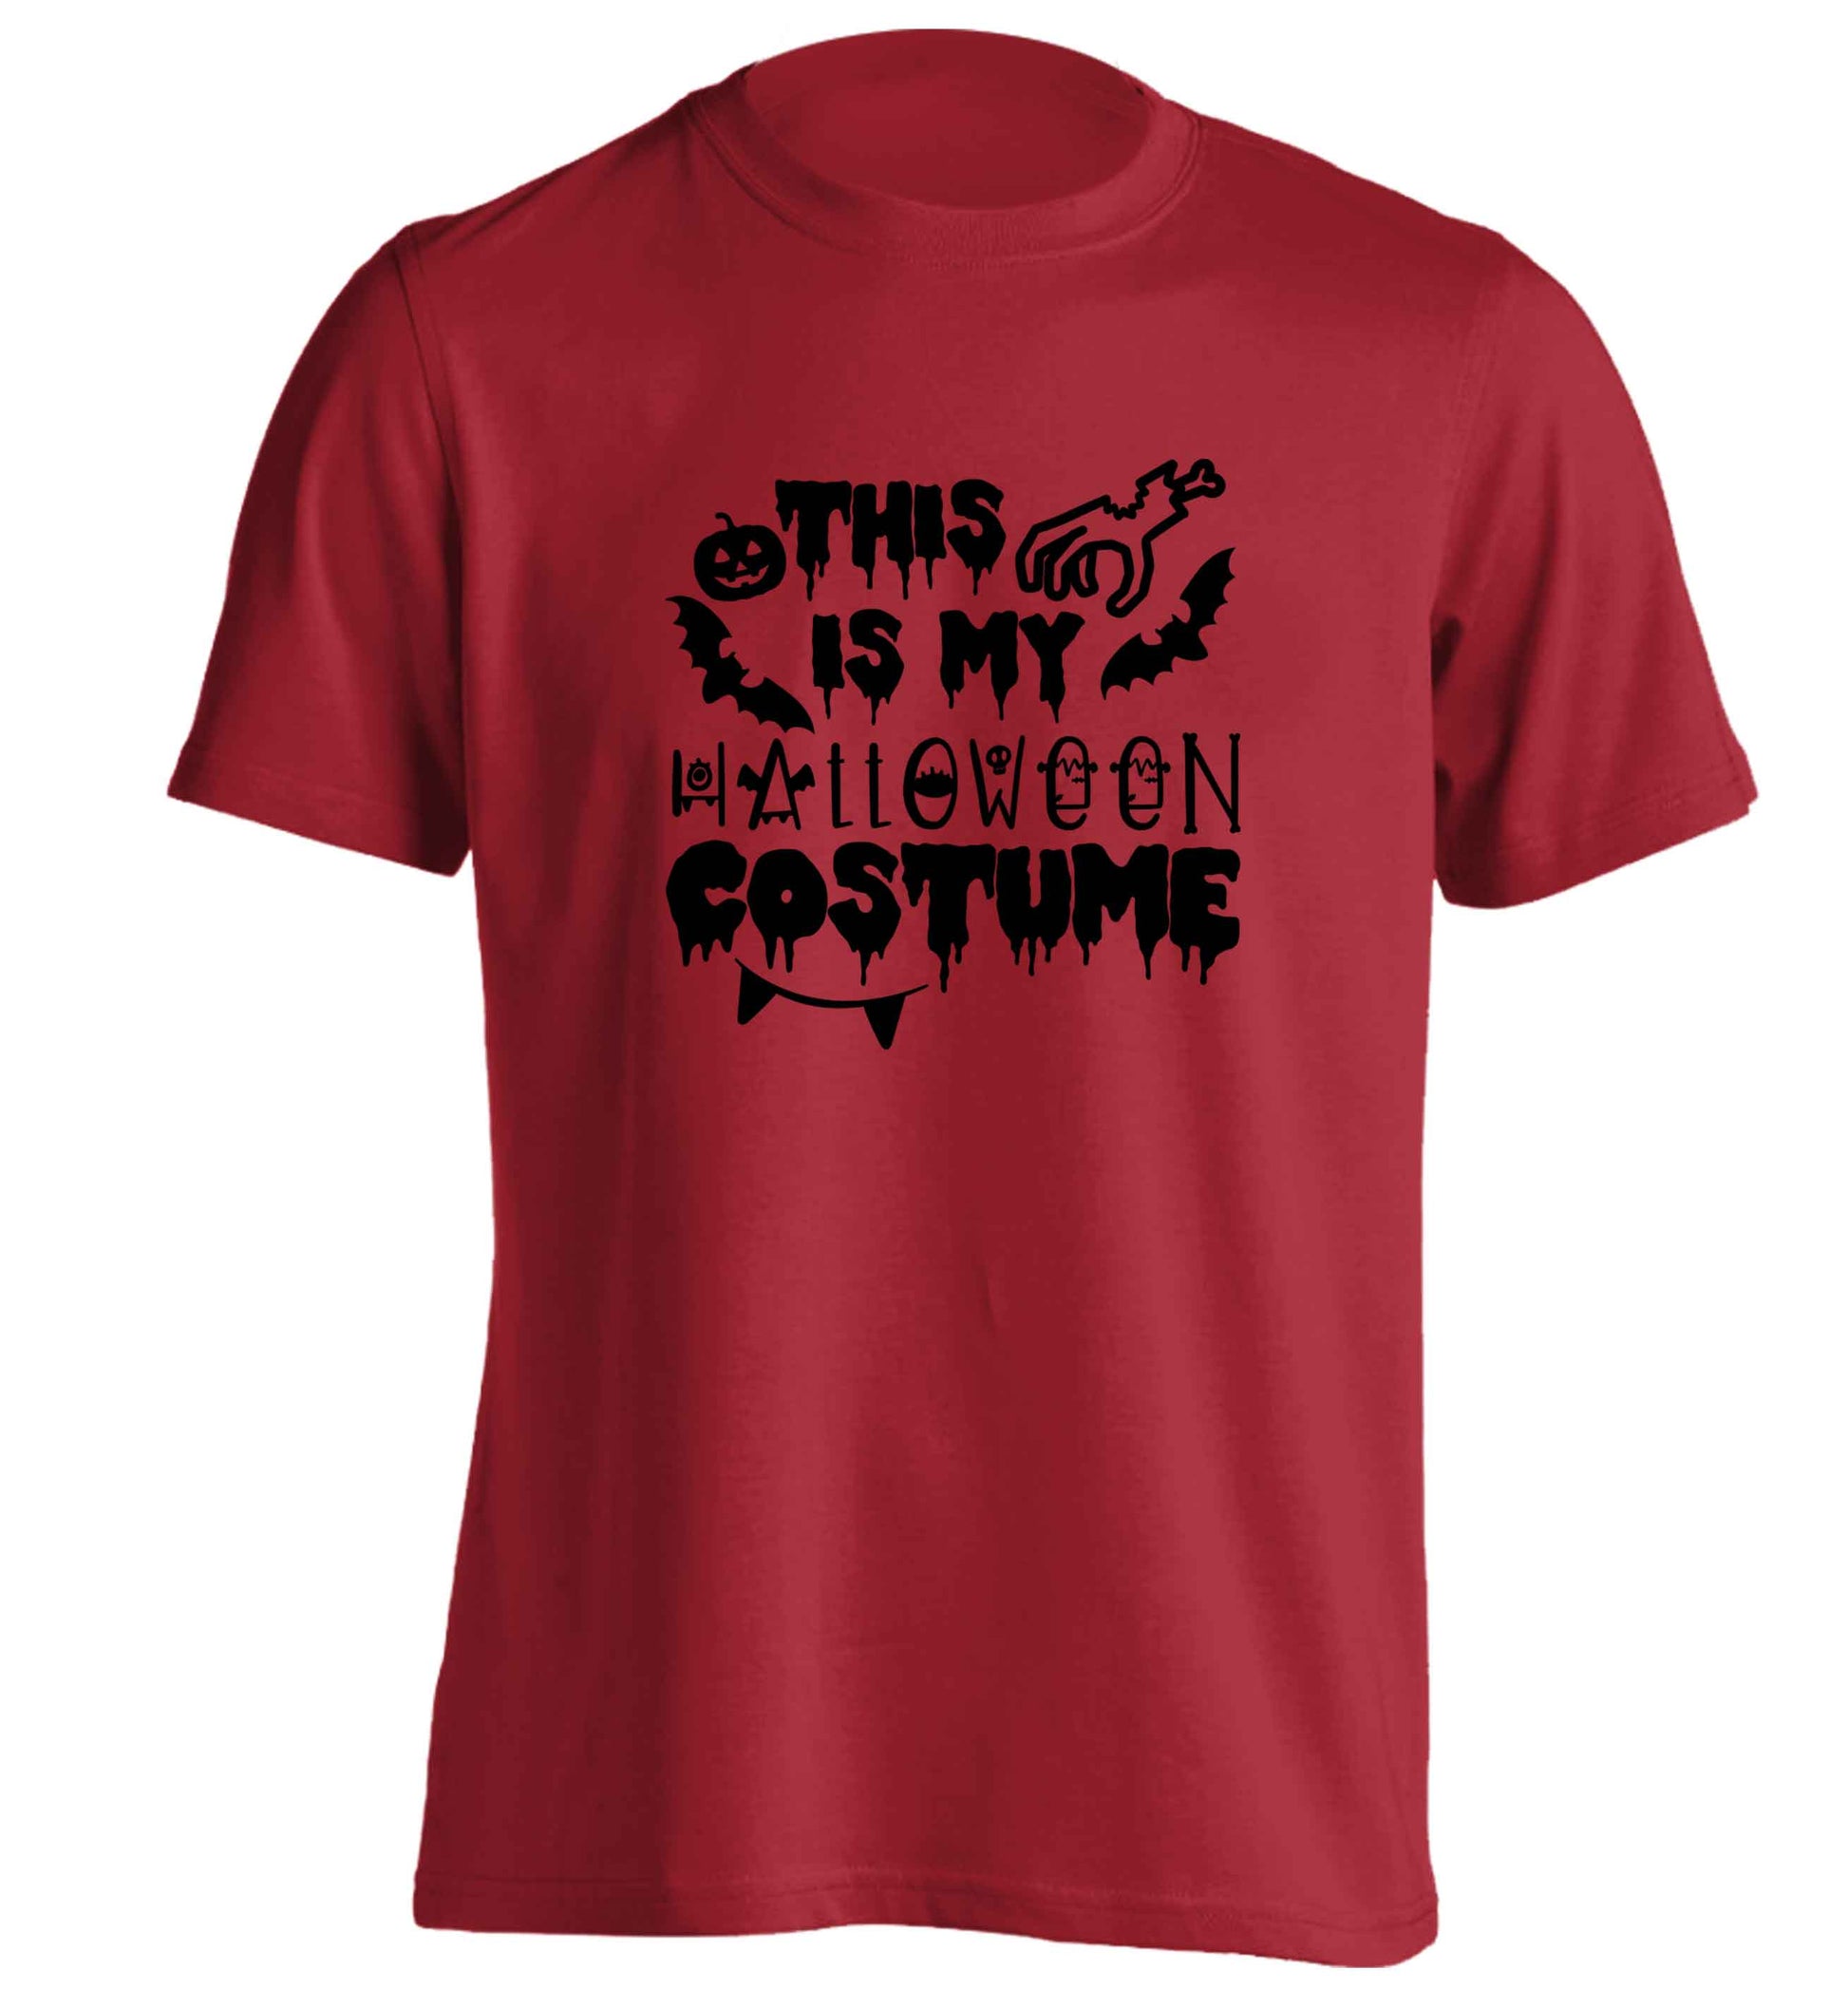 This is my halloween costume adults unisex red Tshirt 2XL